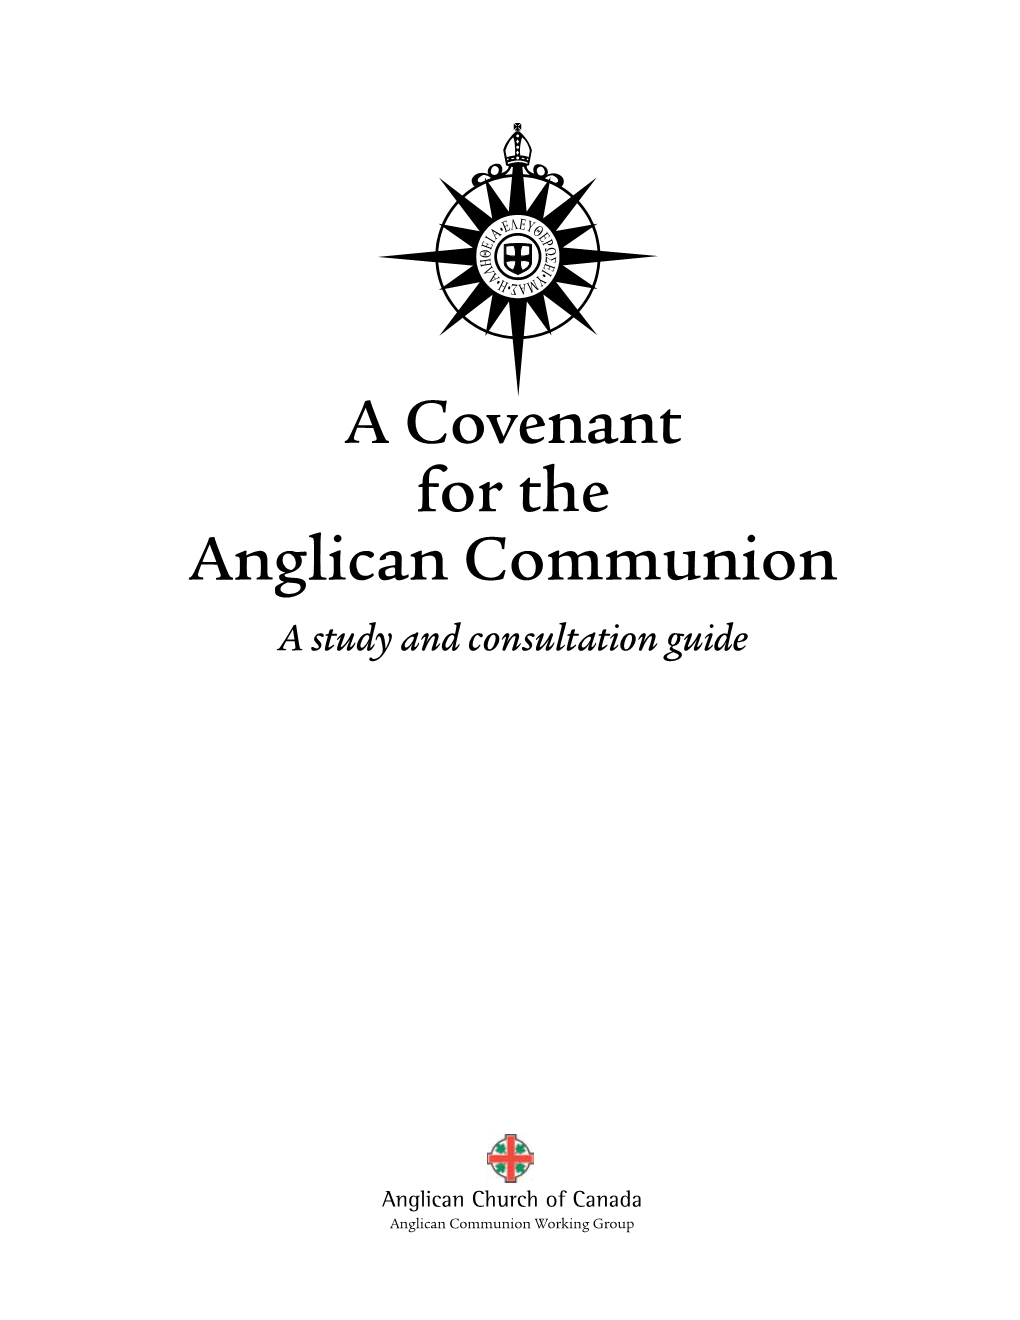 A Covenant for the Anglican Communion a Study and Consultation Guide